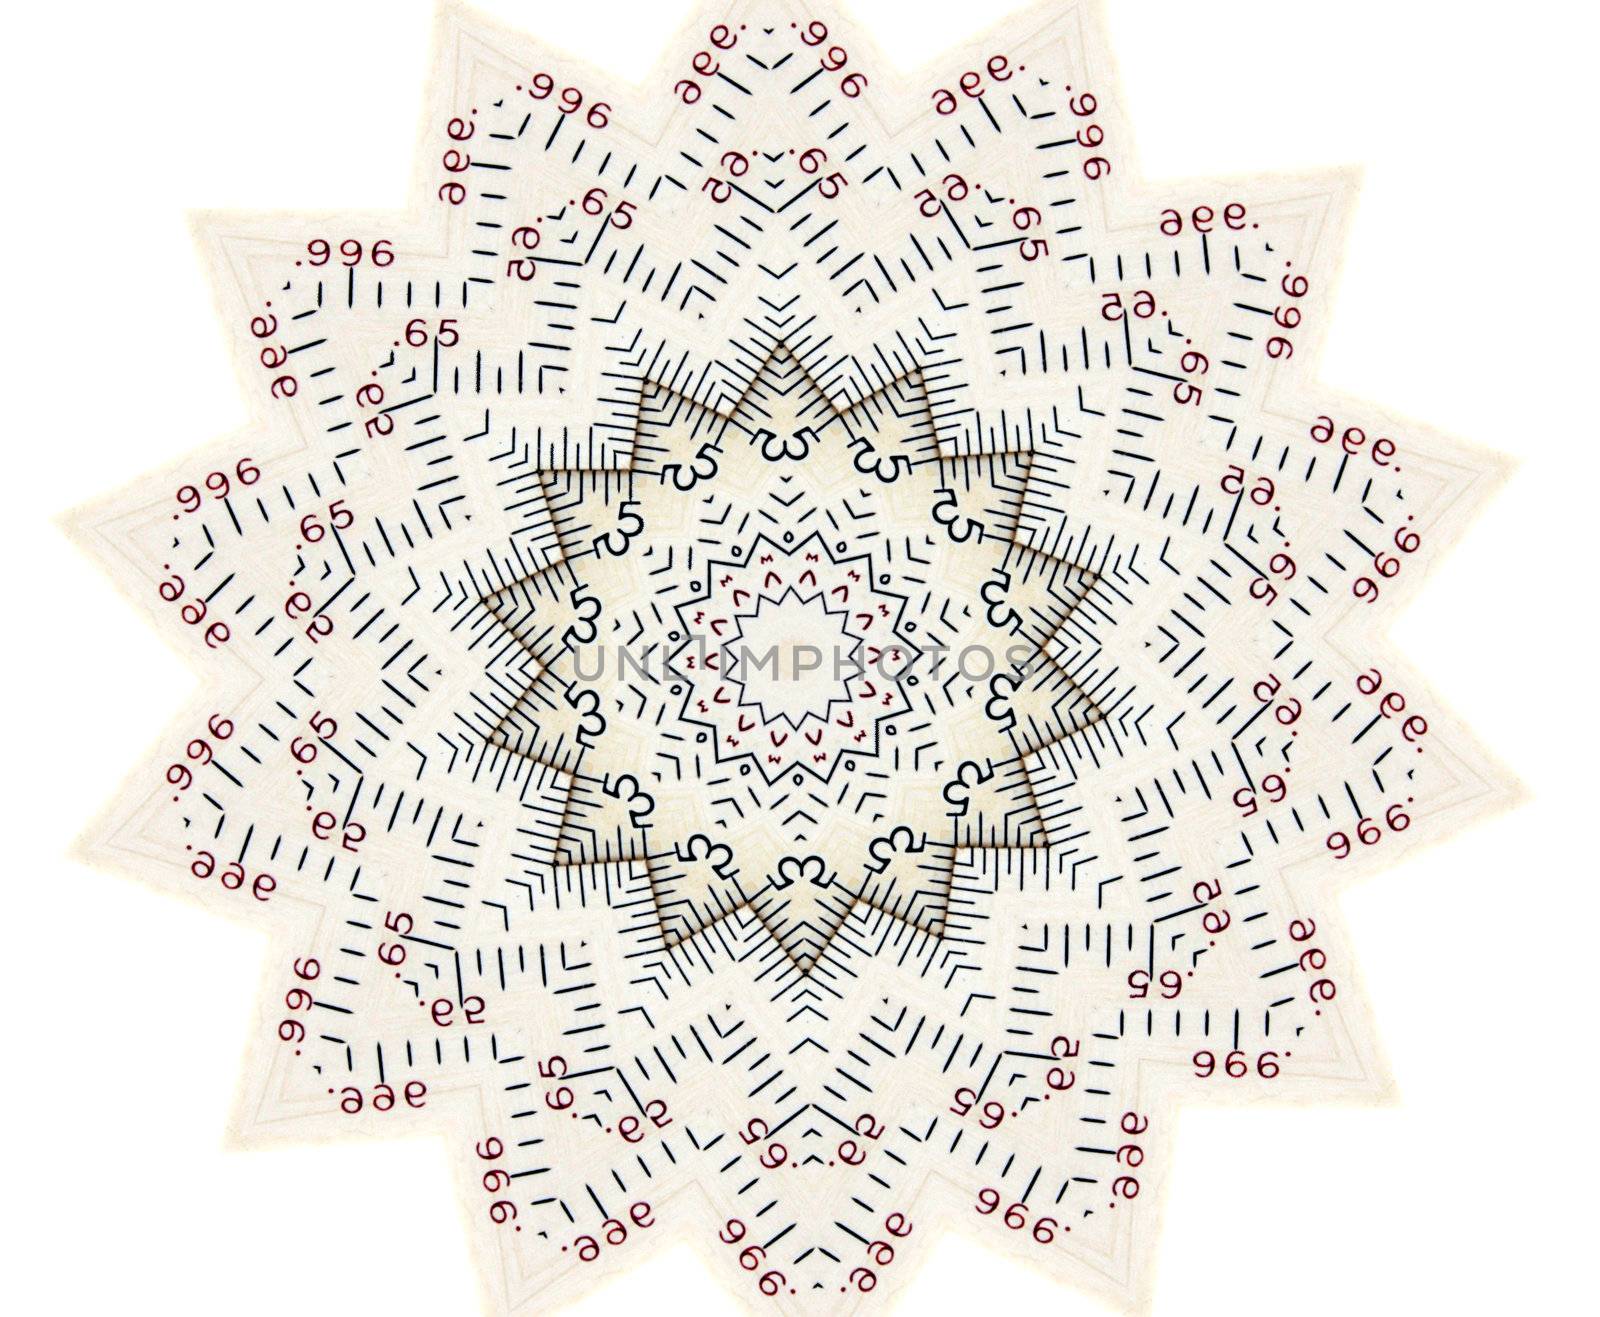 black, white, red and gray image generated from a slide rule
